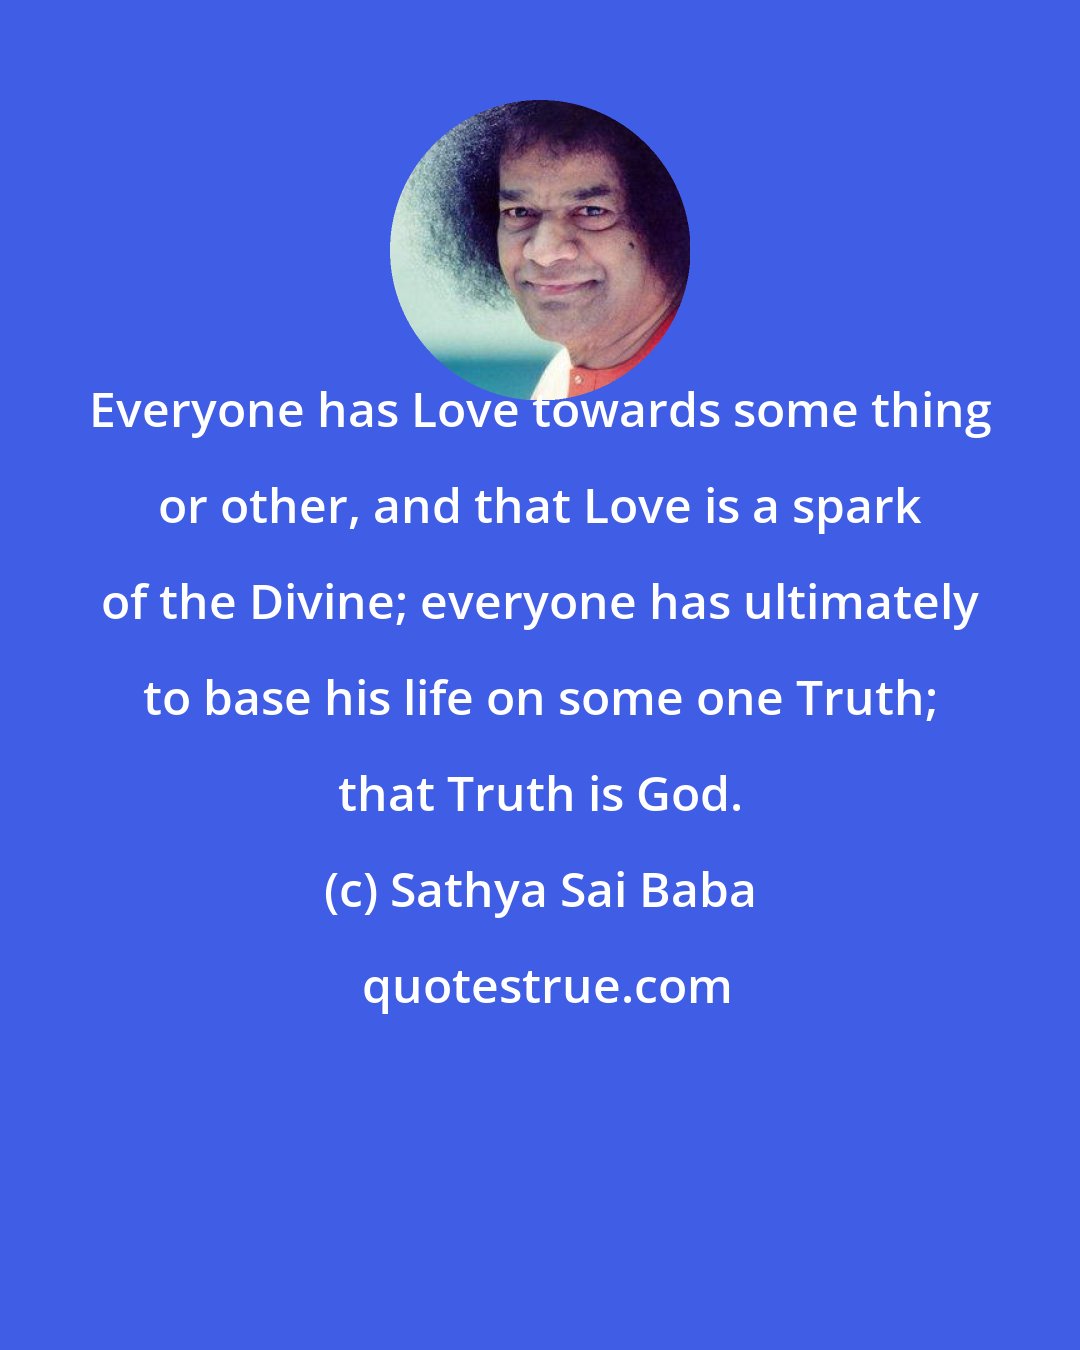 Sathya Sai Baba: Everyone has Love towards some thing or other, and that Love is a spark of the Divine; everyone has ultimately to base his life on some one Truth; that Truth is God.